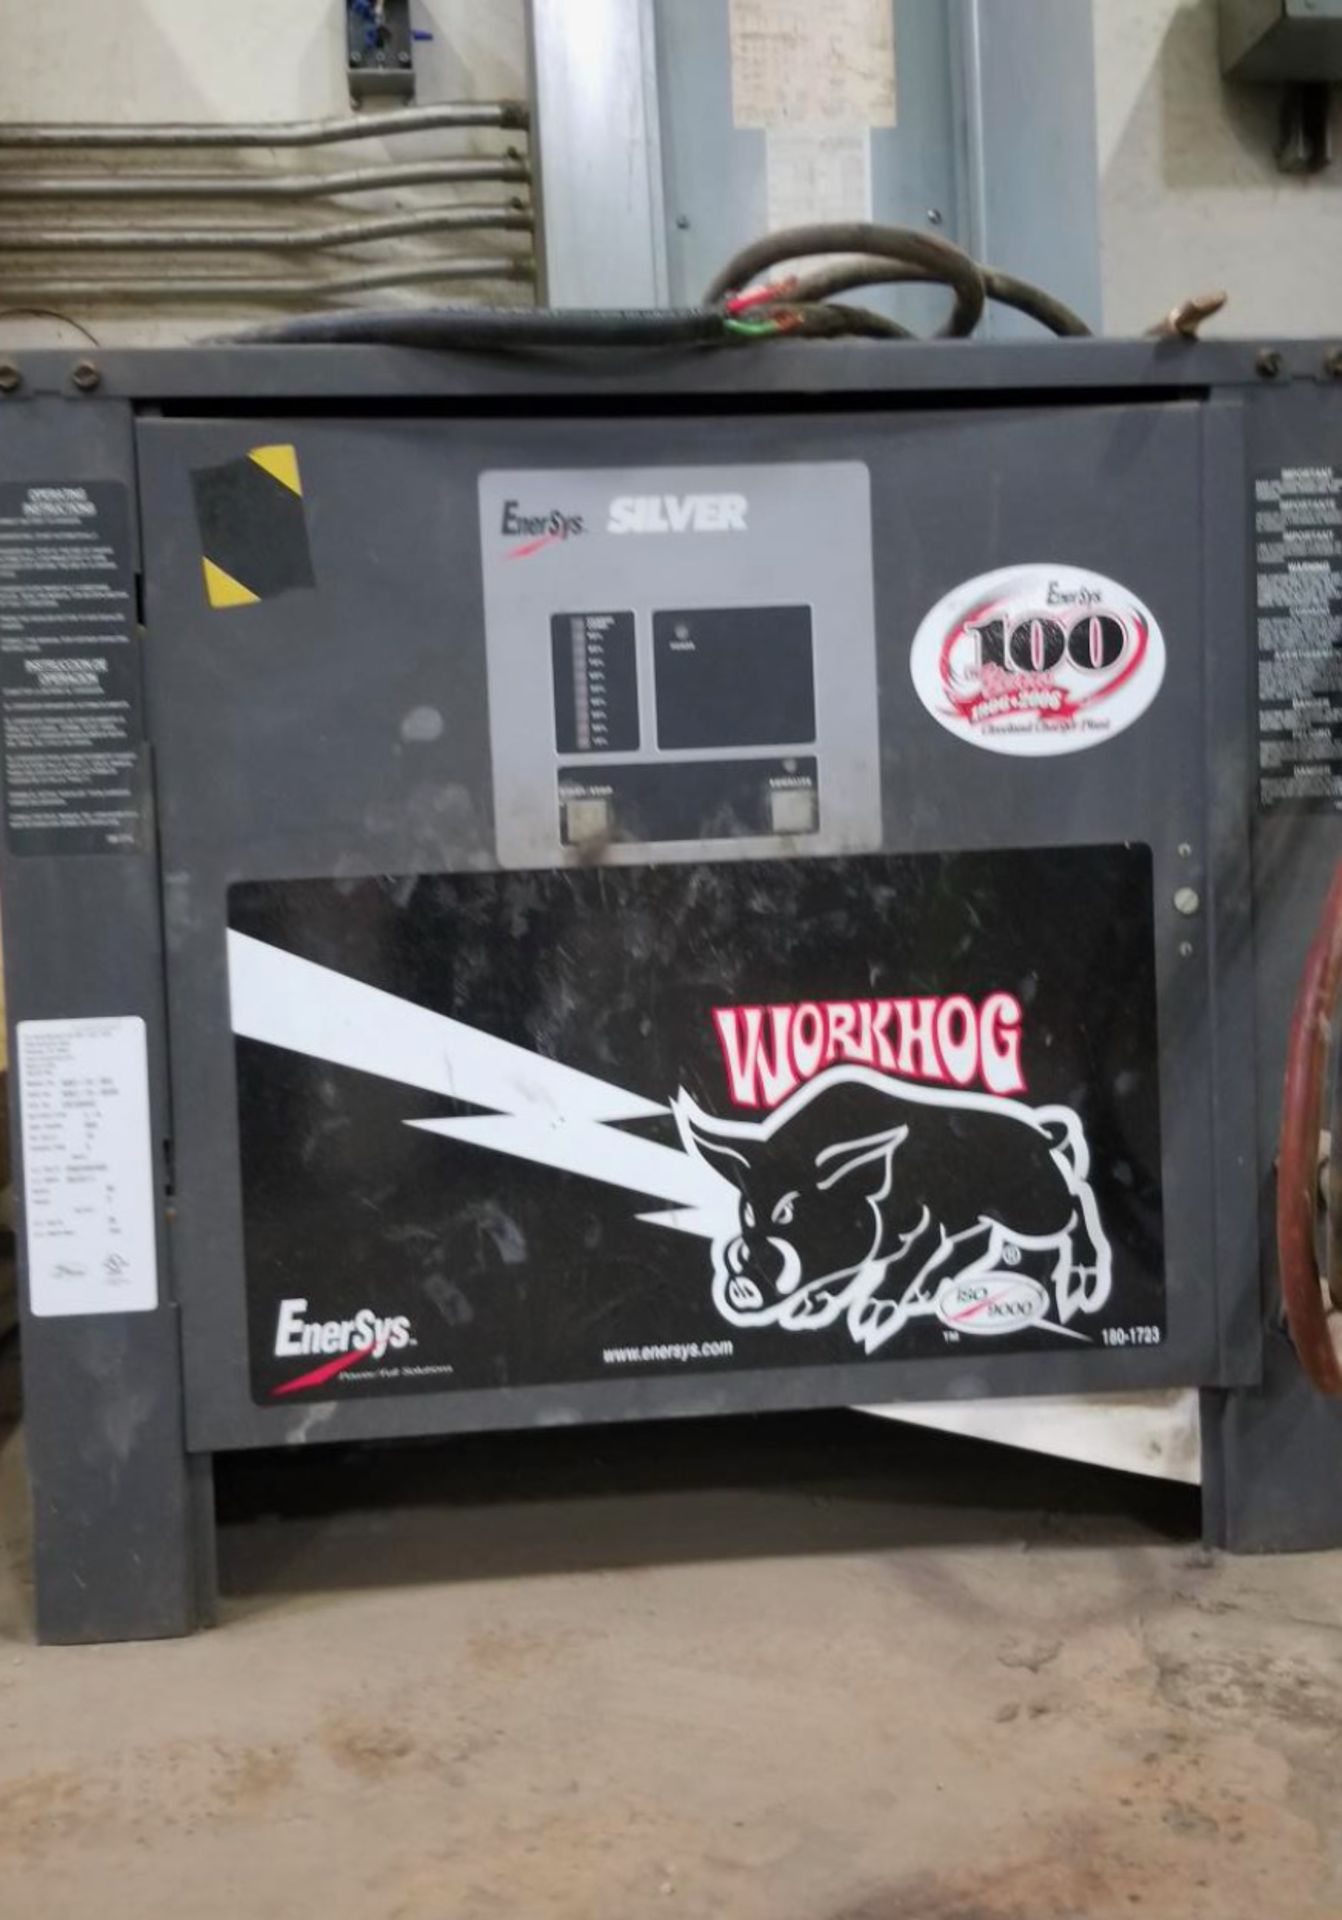 (5) Enersys Workhog Forklift Battery Chargers, 36V / 164 Amps Max, Model WS3-18-865 - Image 5 of 10